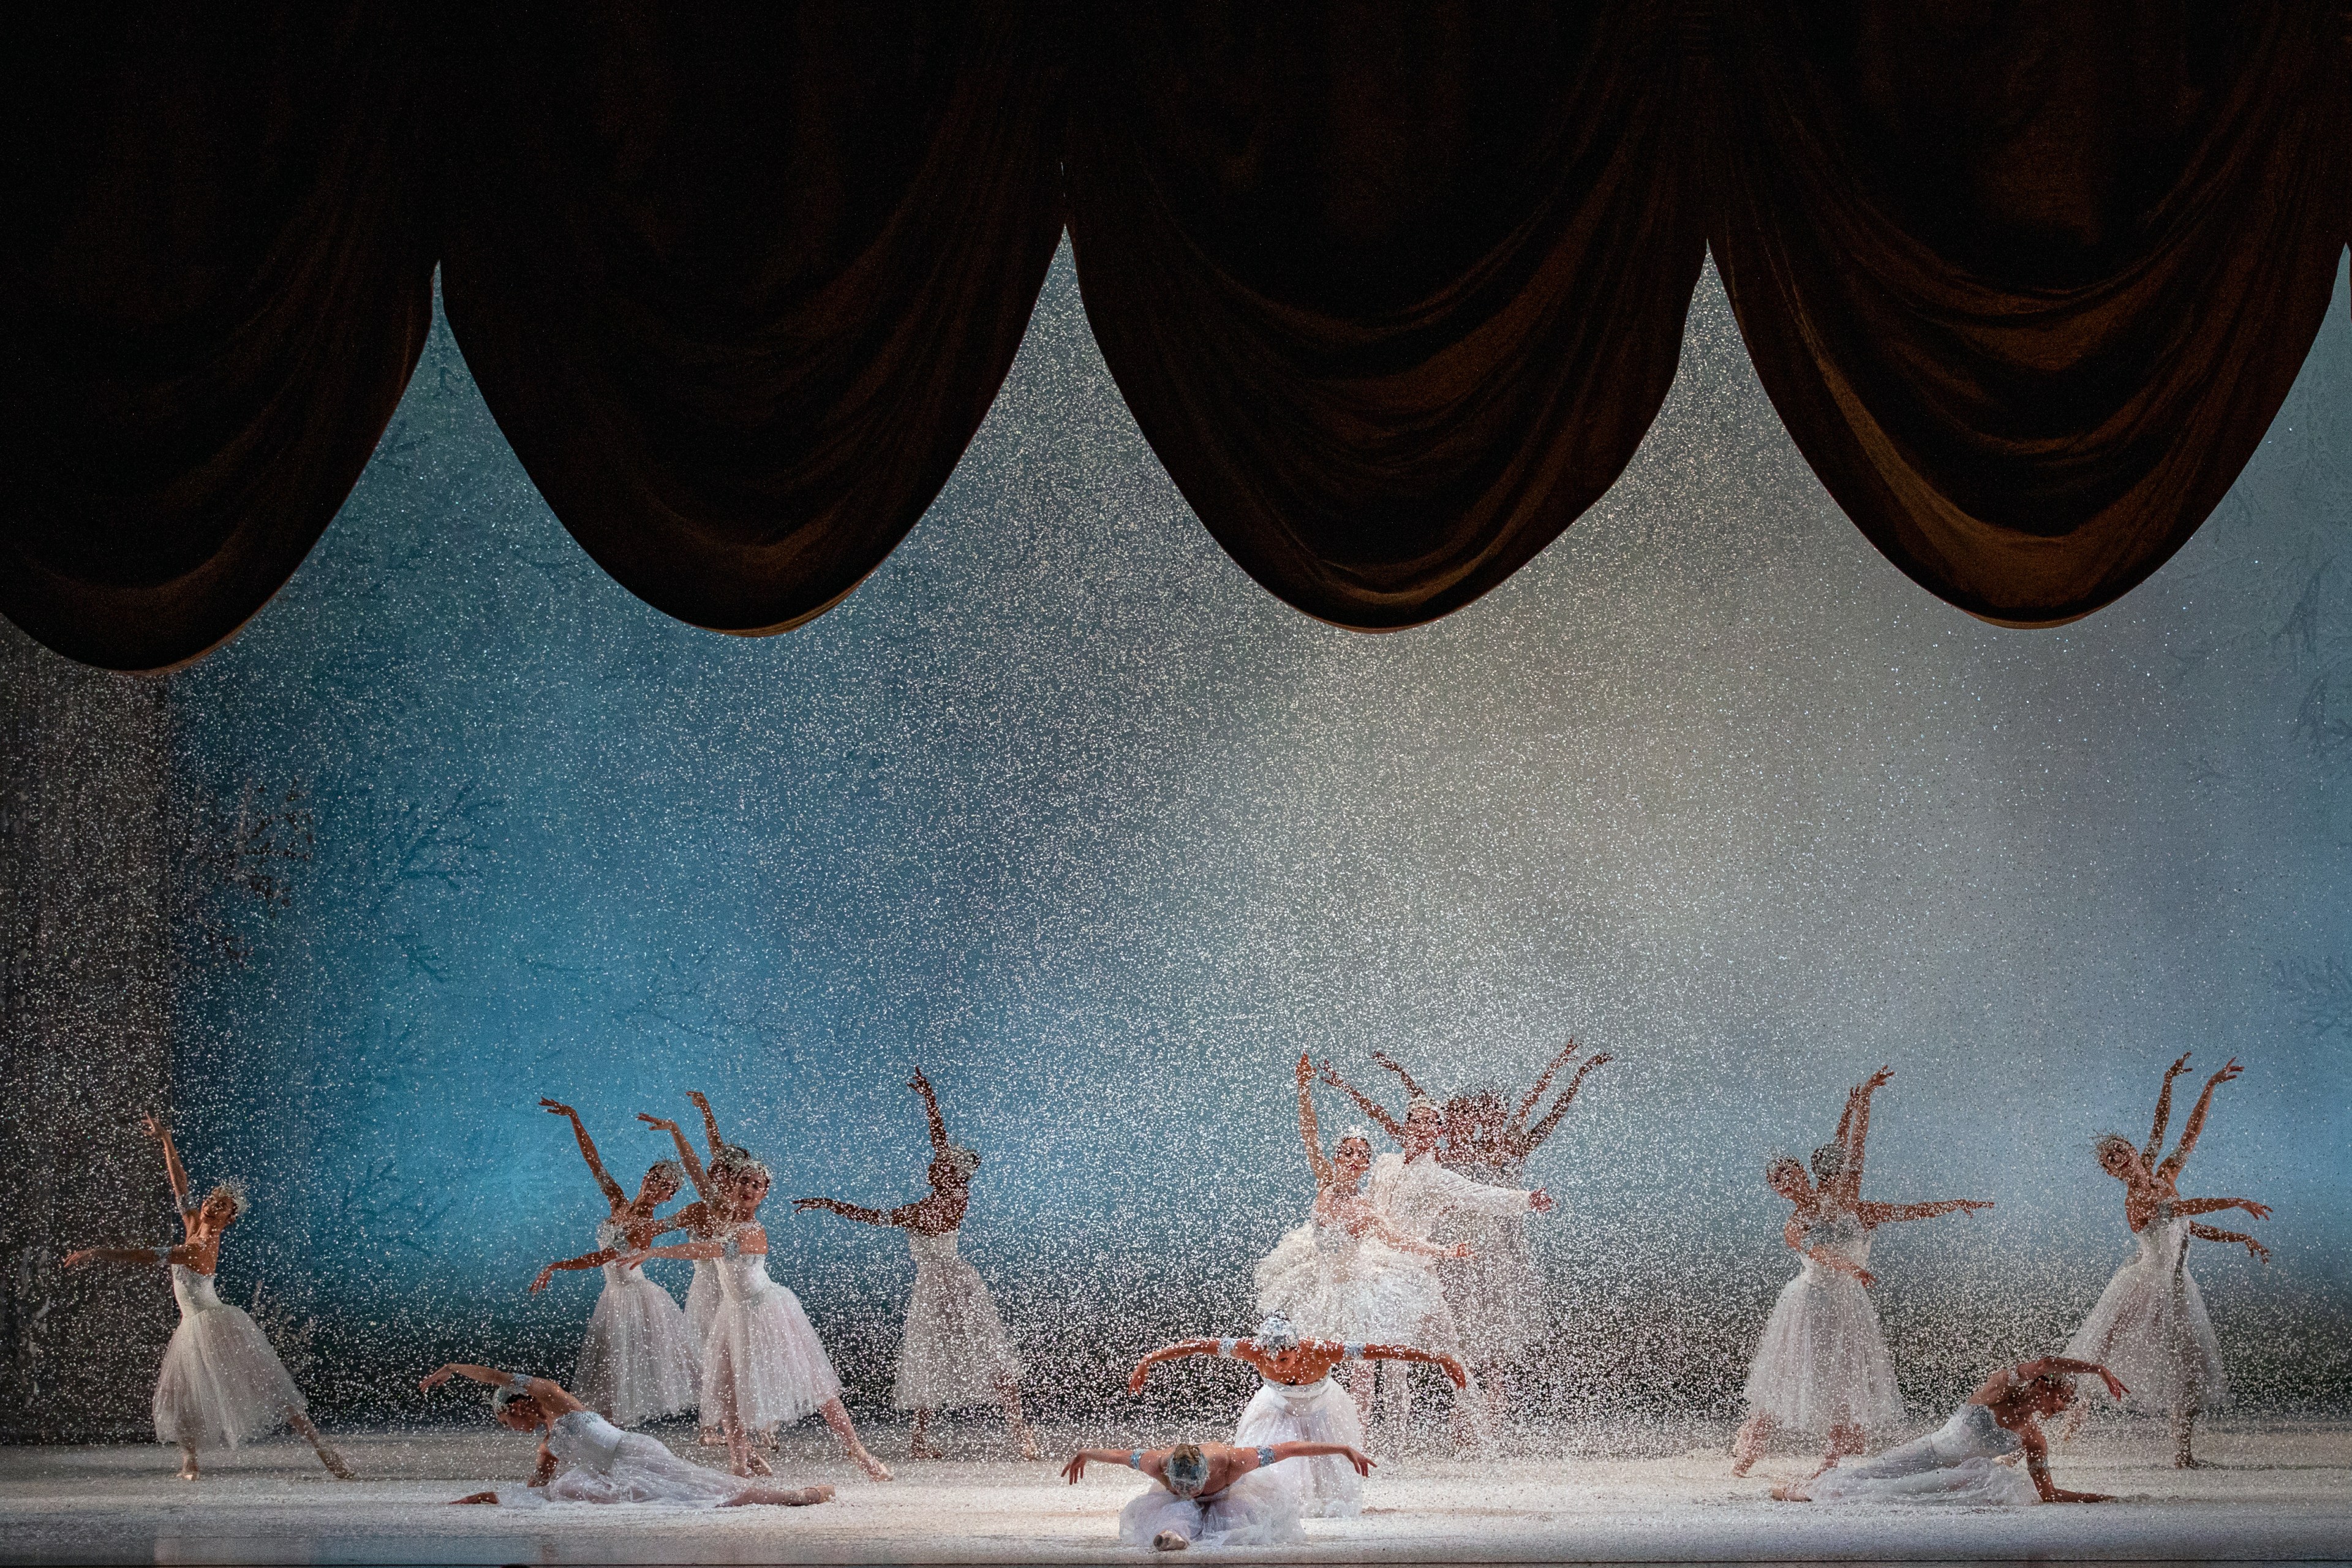 Ballet dancers perform on stage as snow falls with a large curtain closing above them.